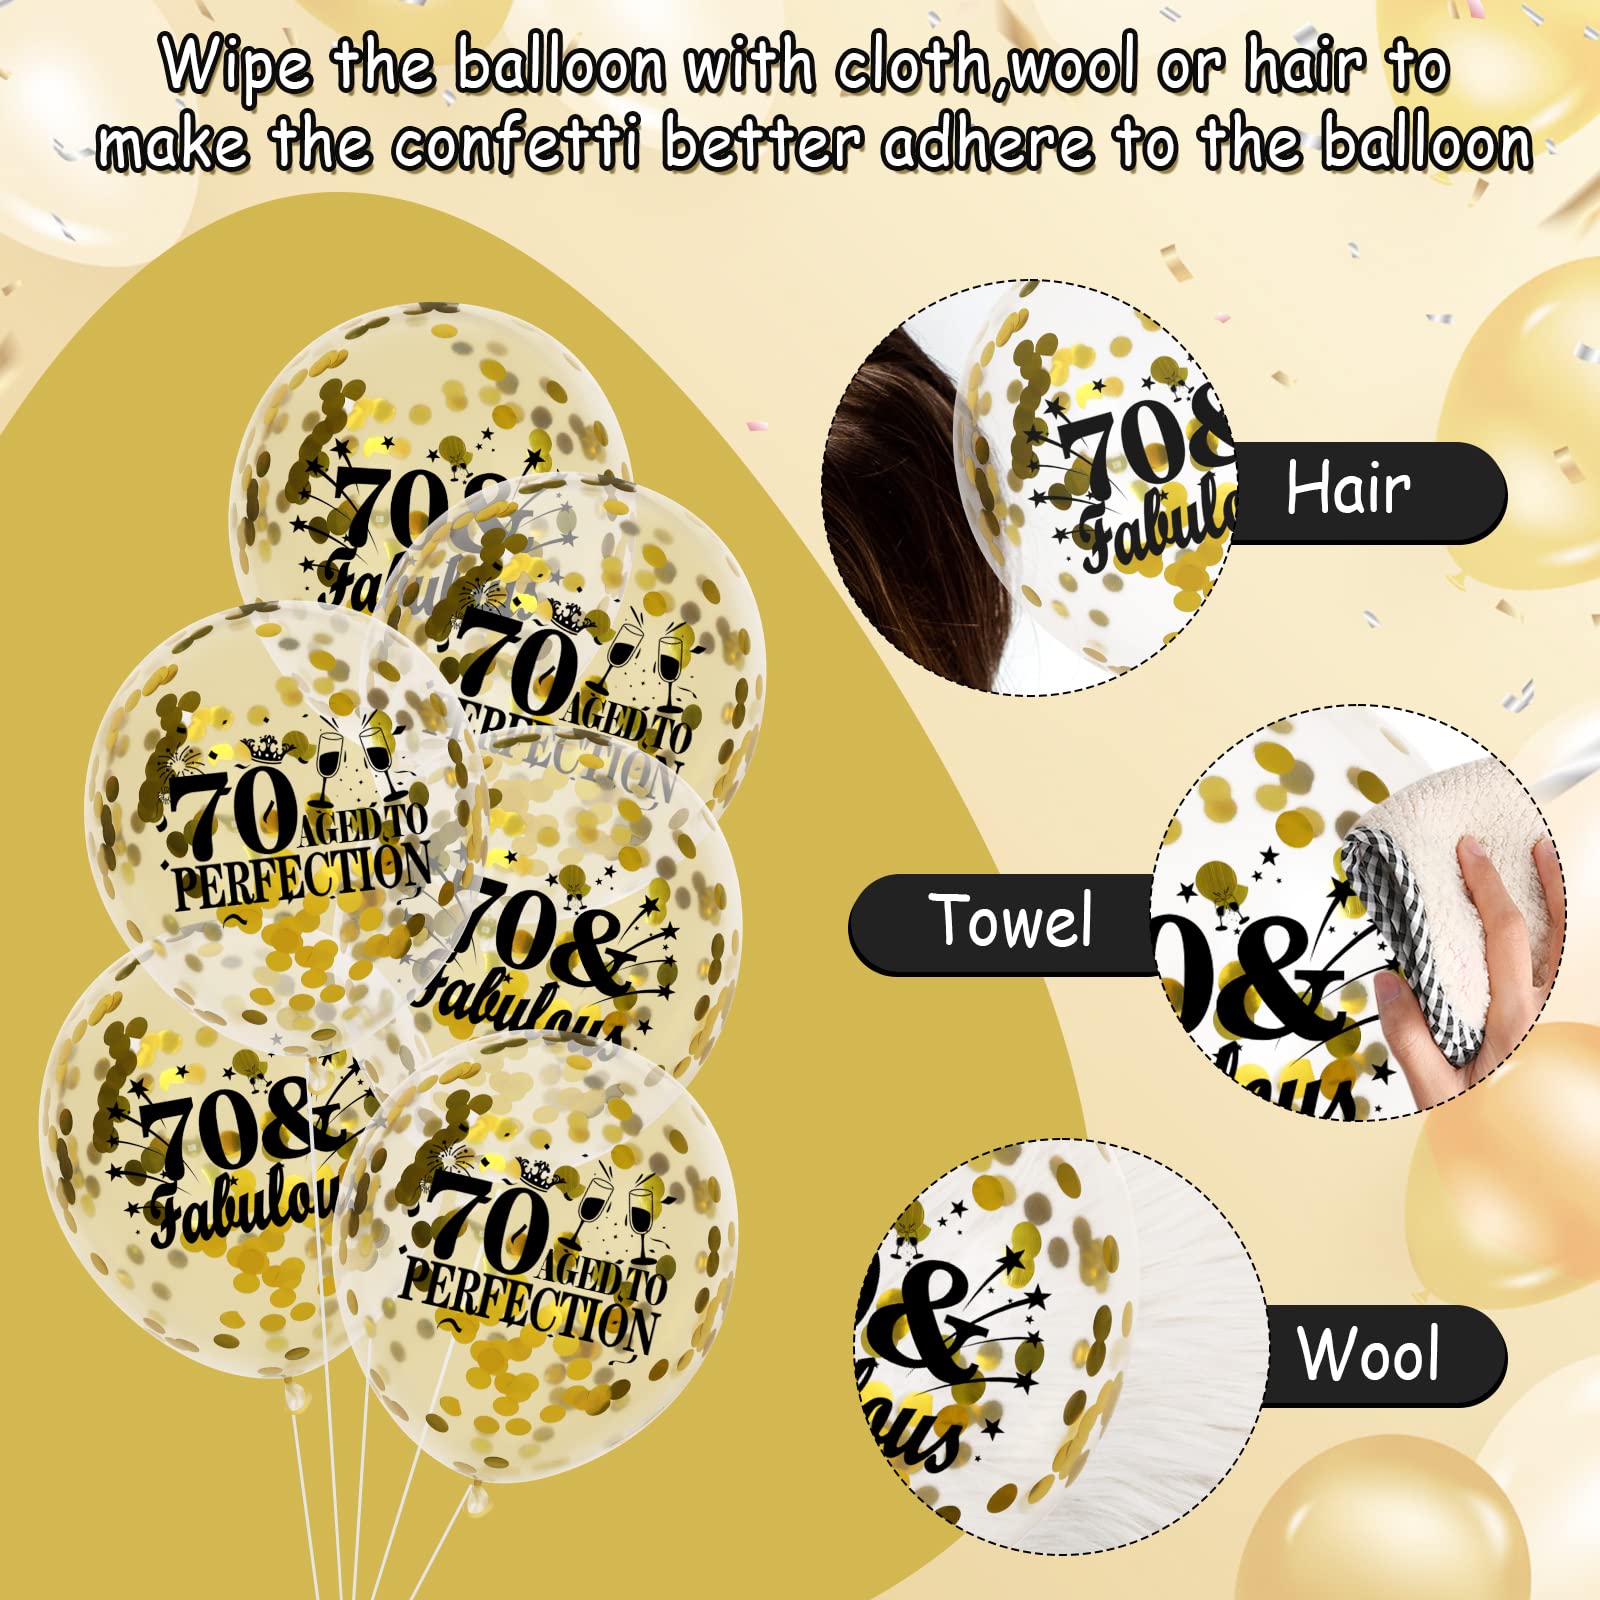 Vintage 70th Birthday Balloons 18Pcs Black Gold 1953 Balloons Party Decorations for Men Women 70th Anniversary Birthday Party Black Gold Confetti Latex Balloons Happy Birthday Decor Supplies 12 inch